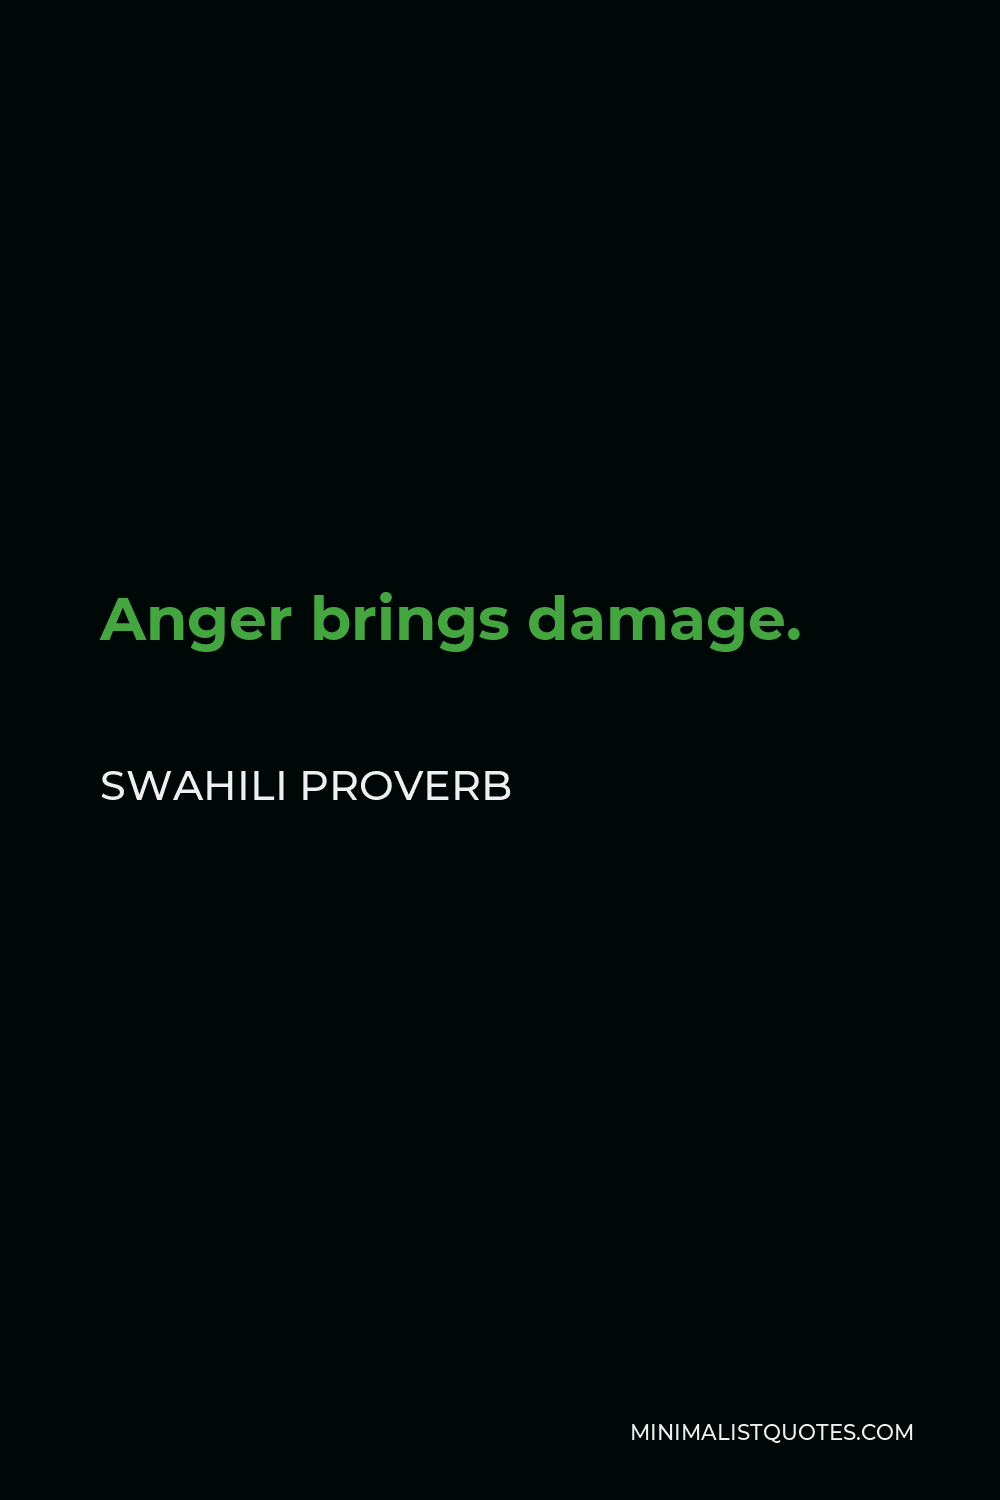 Swahili Proverb Quote - Anger brings damage.